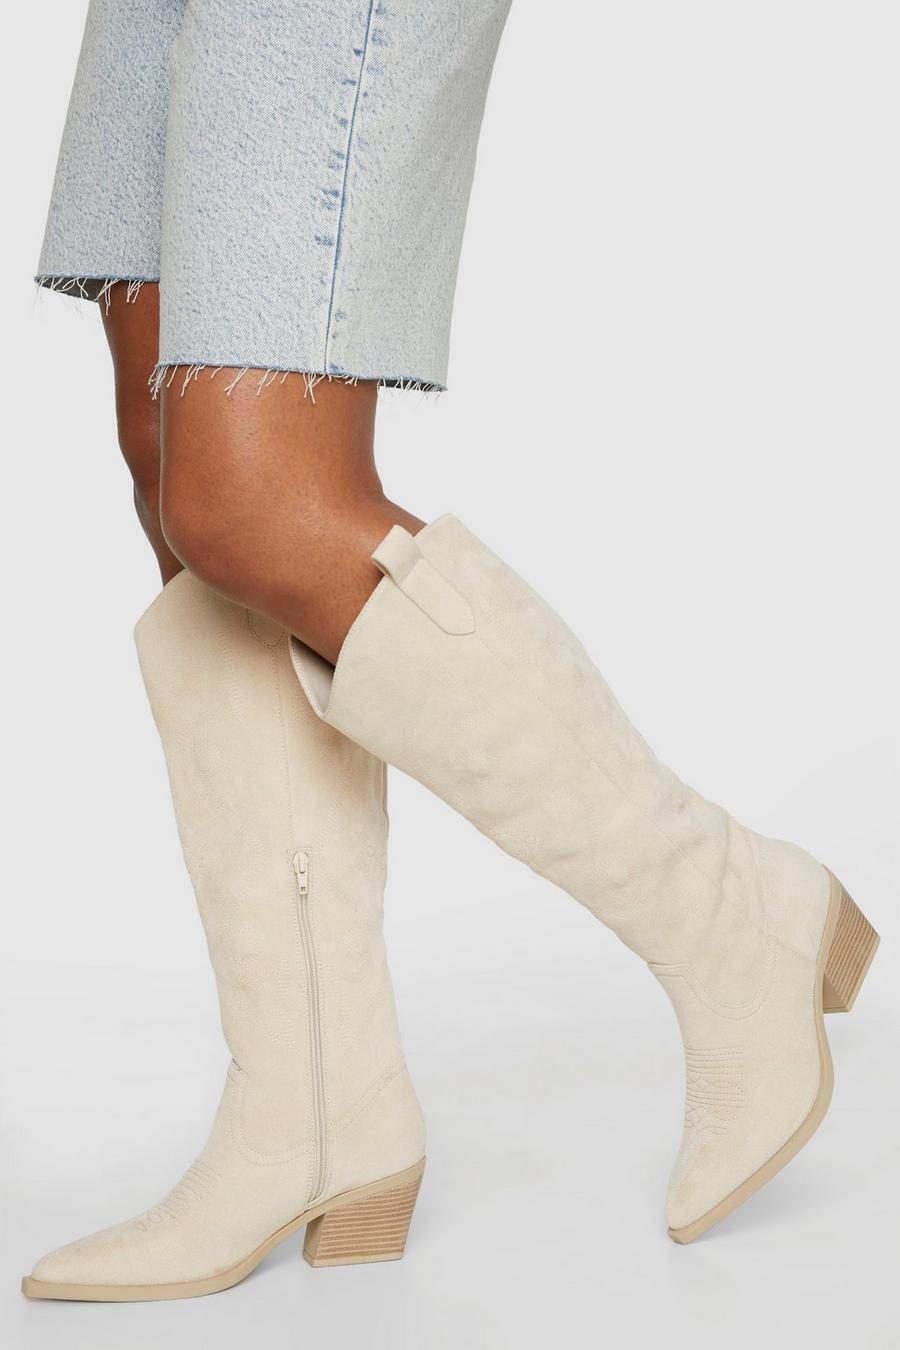 Beige Low Heel Embroidered Knee High Western Cowboy Boots